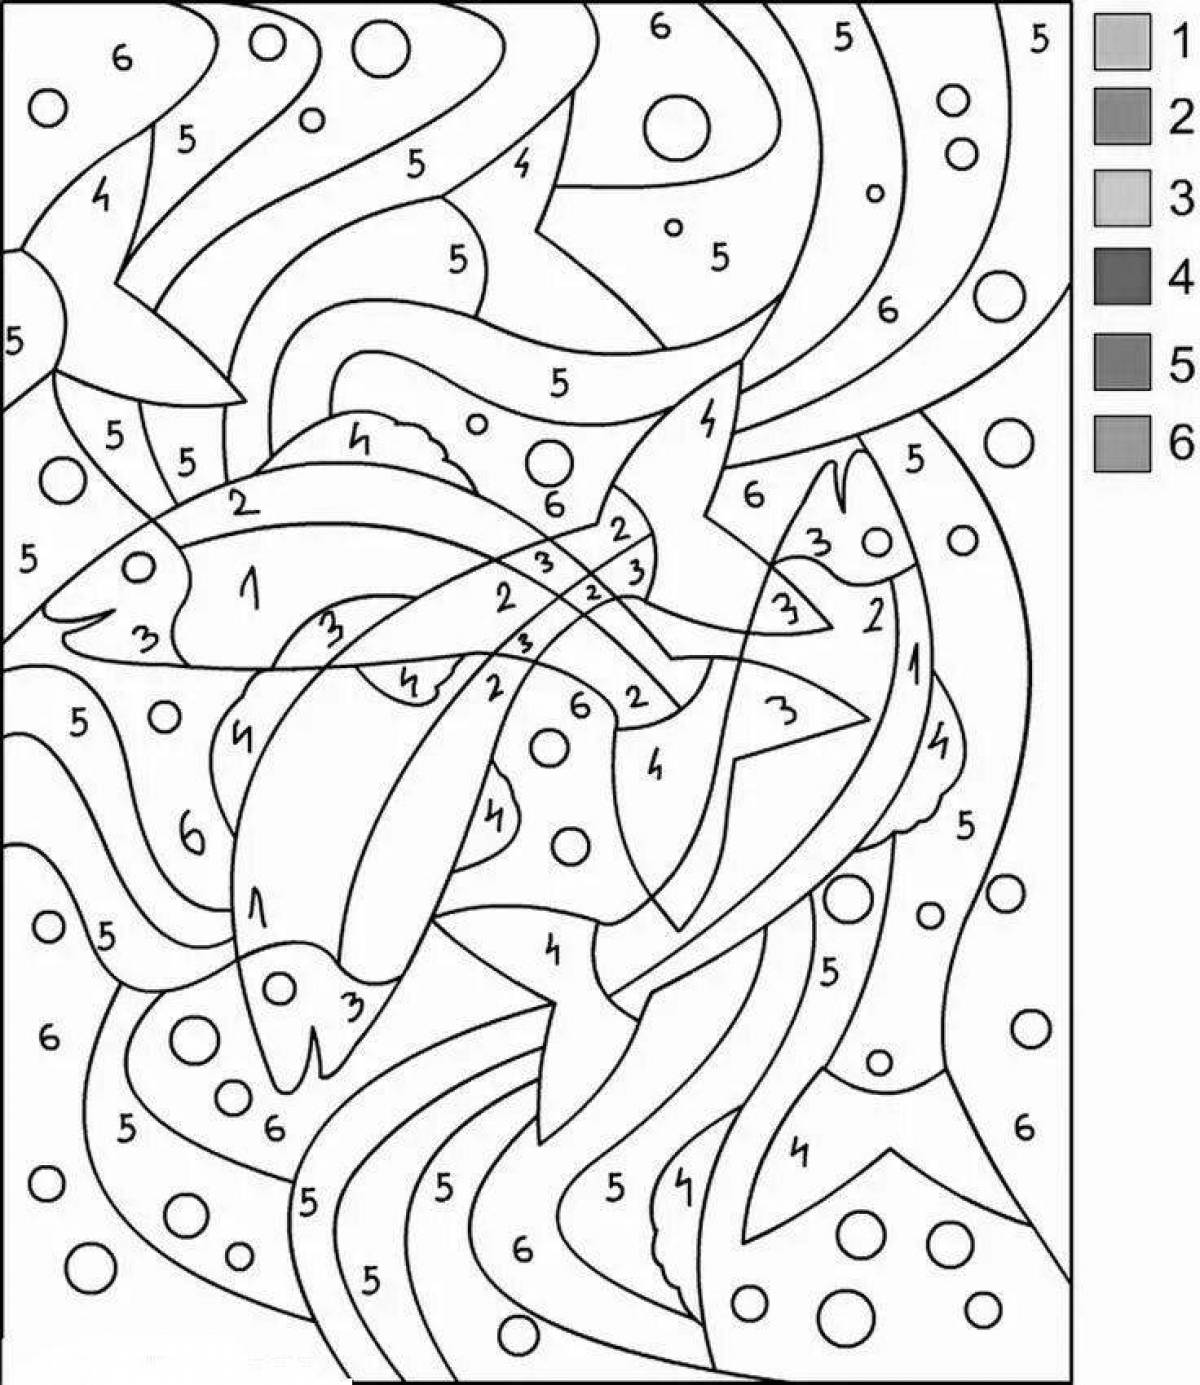 Coloring pages with crazy numbers